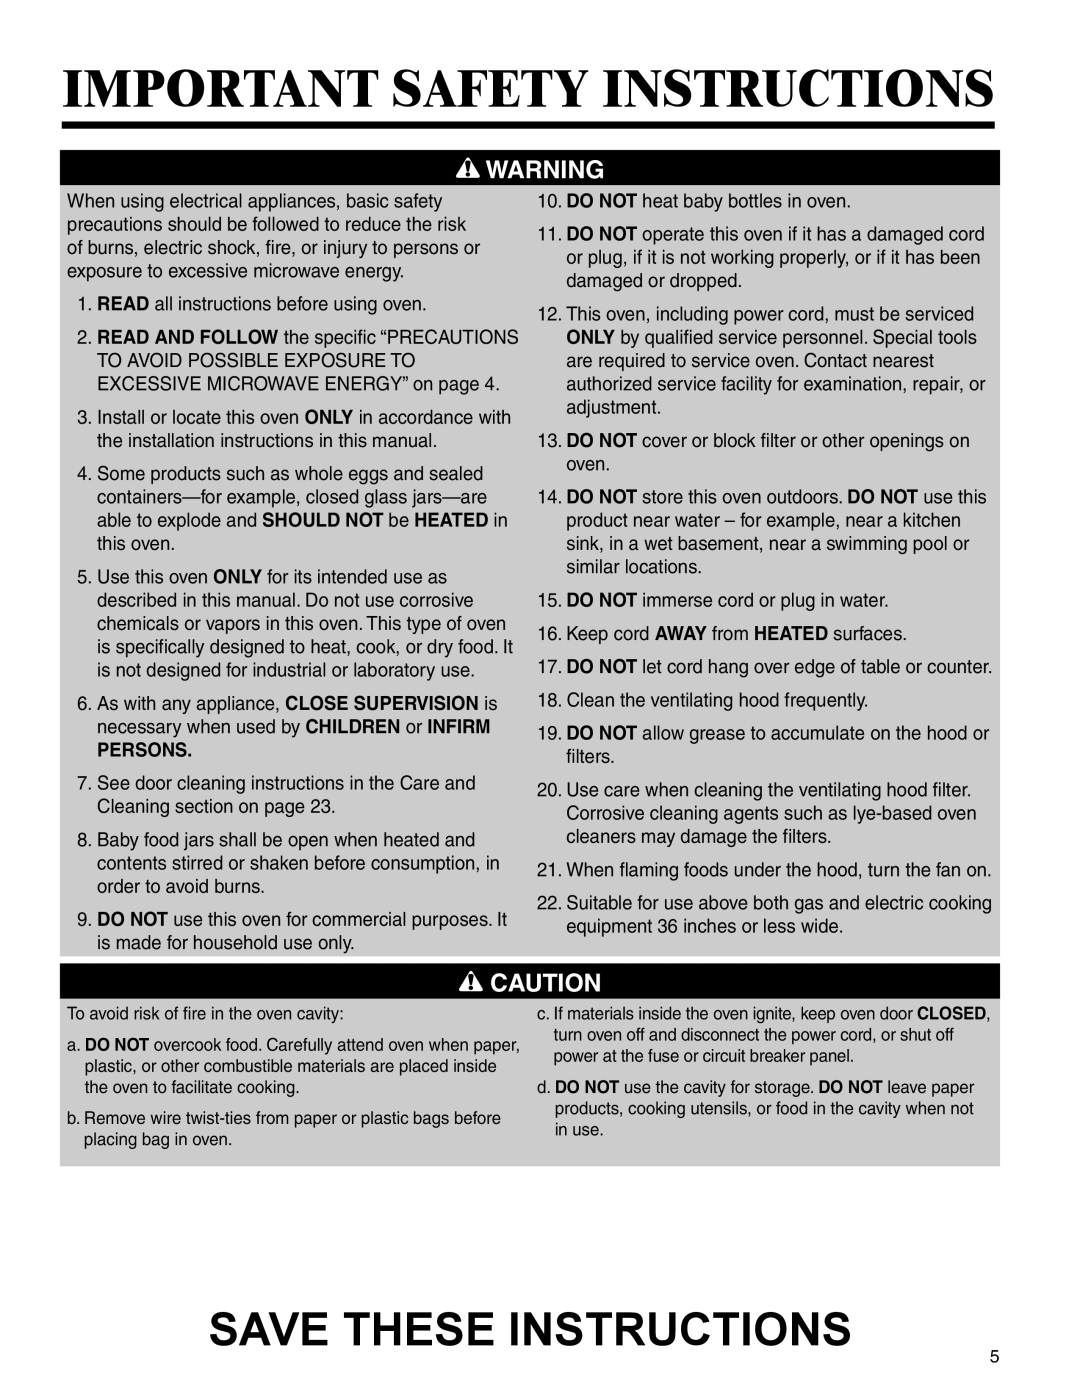 Maytag MMV4205BA important safety instructions Important Safety Instructions, Save These Instructions, Persons 